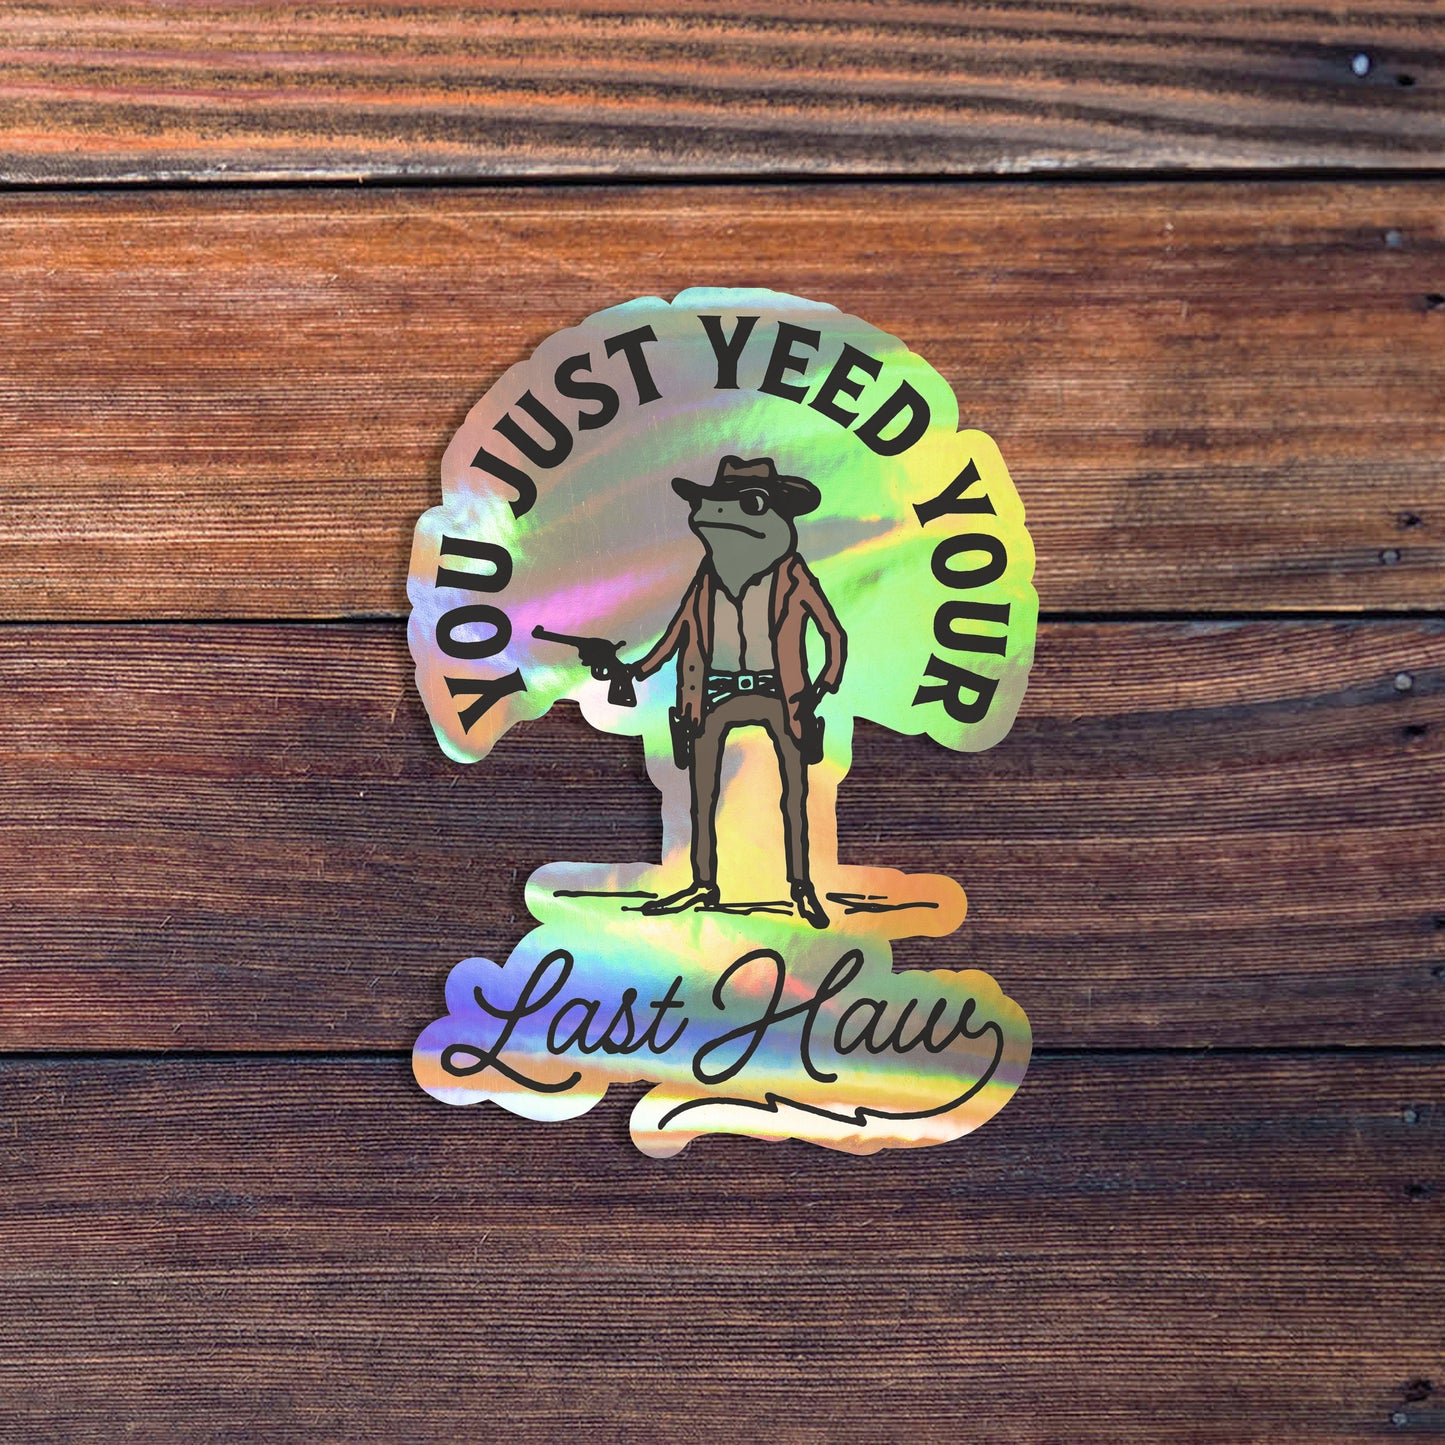 You Just Yeed Your Last Haw Sticker, Funny Frog Cowboy Sticker, Western Style Cowboy Frog With Gun Sticker, Vintage Country Sticker, Silly